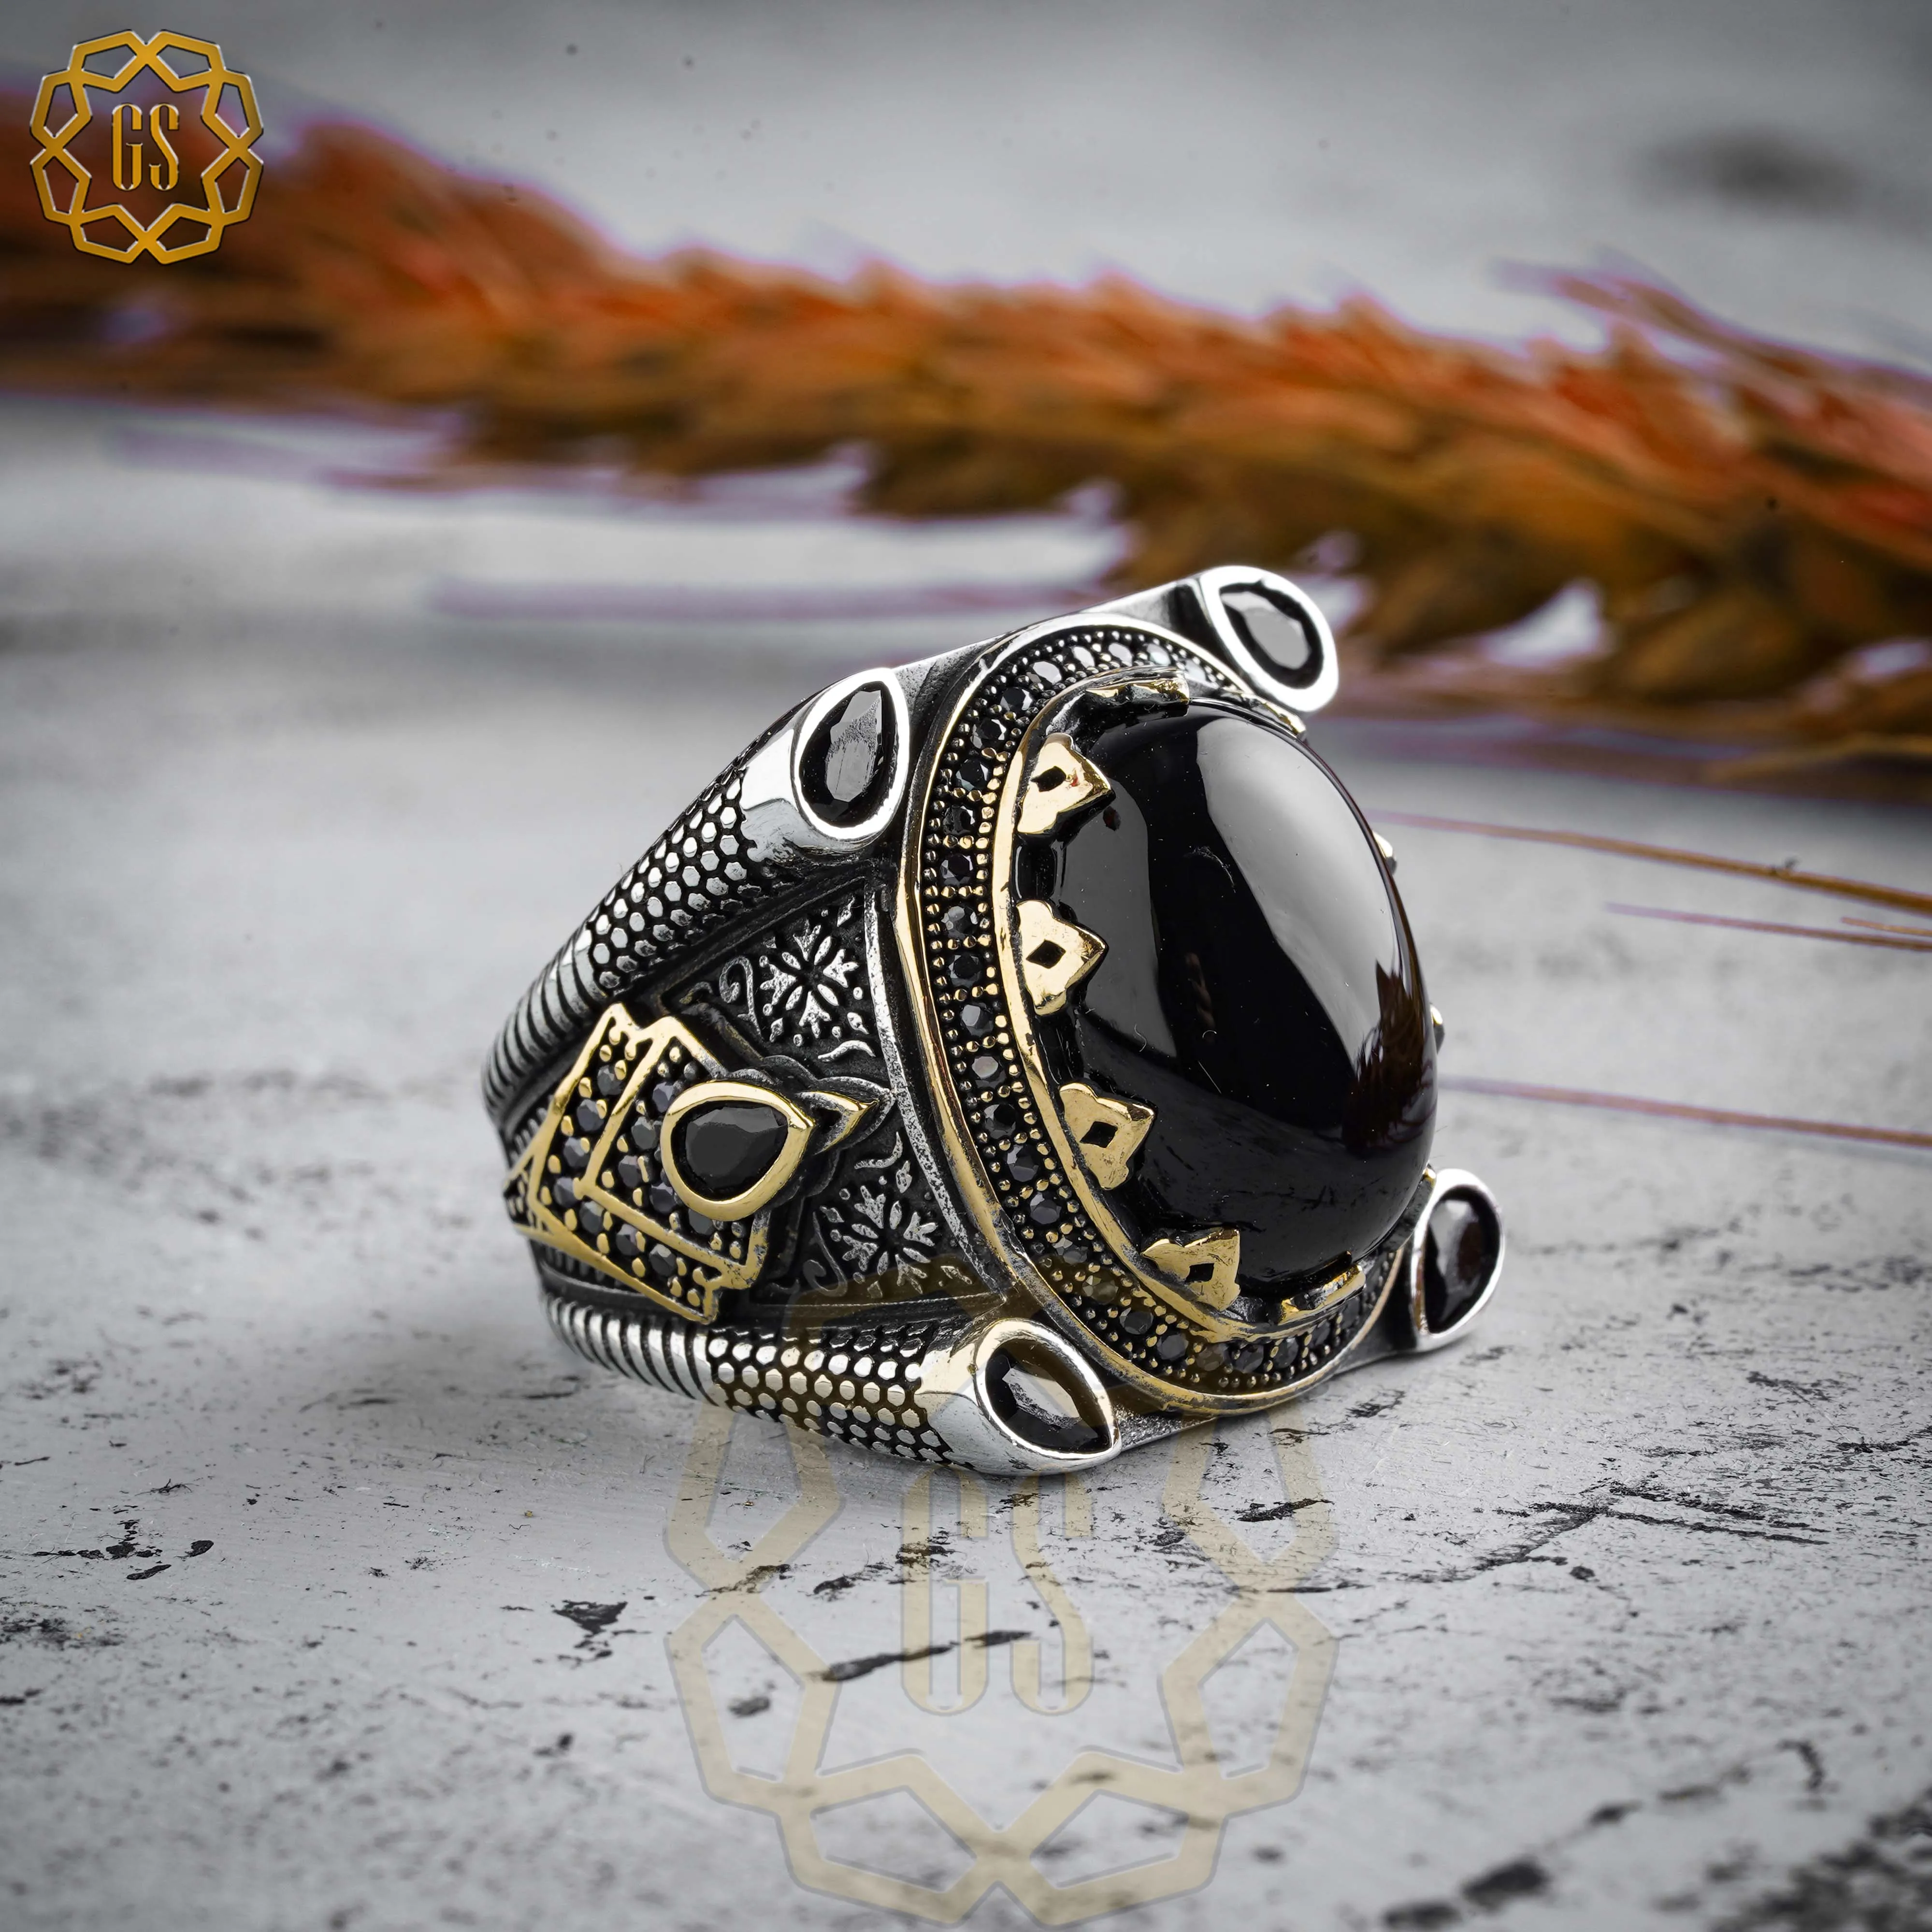 

Silver Ring For Men 925 Made in Turkey With ( Zircon , Onyx , Tiger Eye ) Stone .. Turkish Jewelry .. Guaranteed High Quality